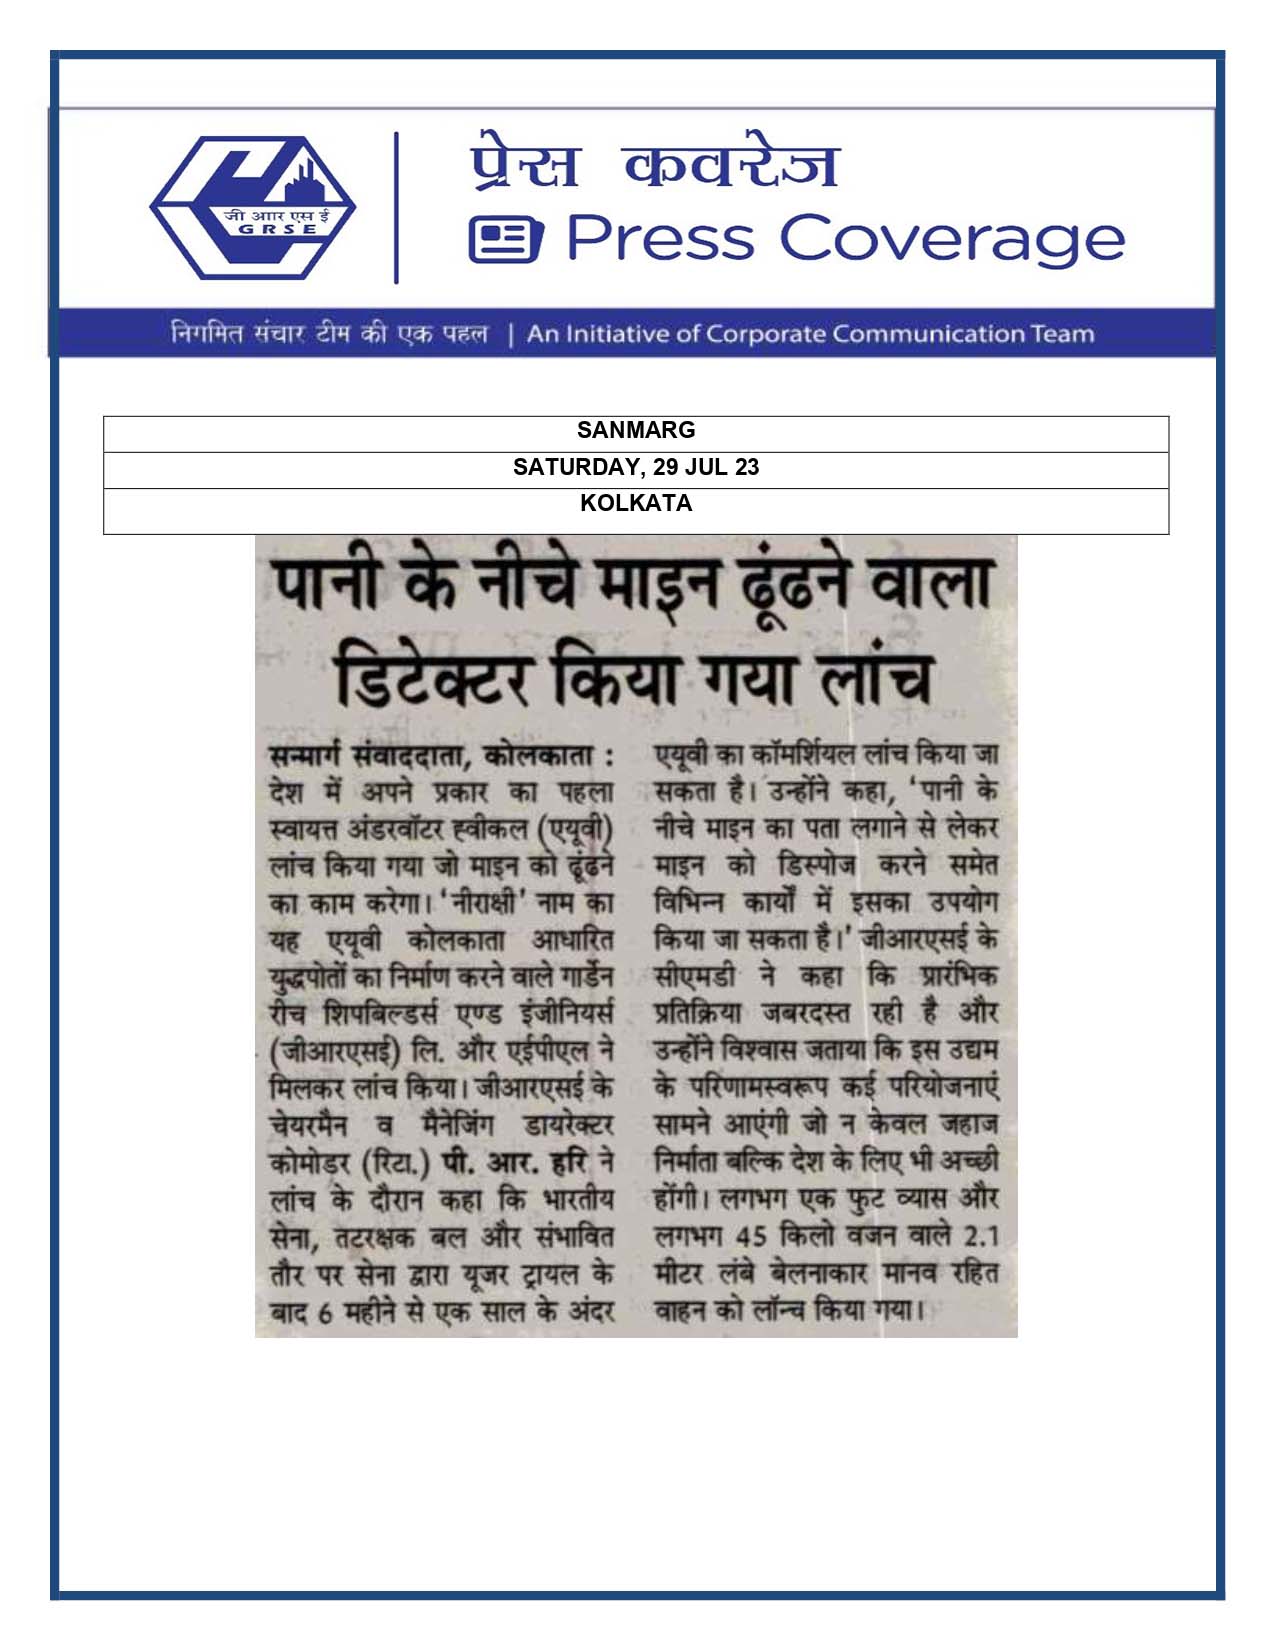 Press Coverage : Sanmarg, 29 Jul 23 : Mine Detector AUV Launched